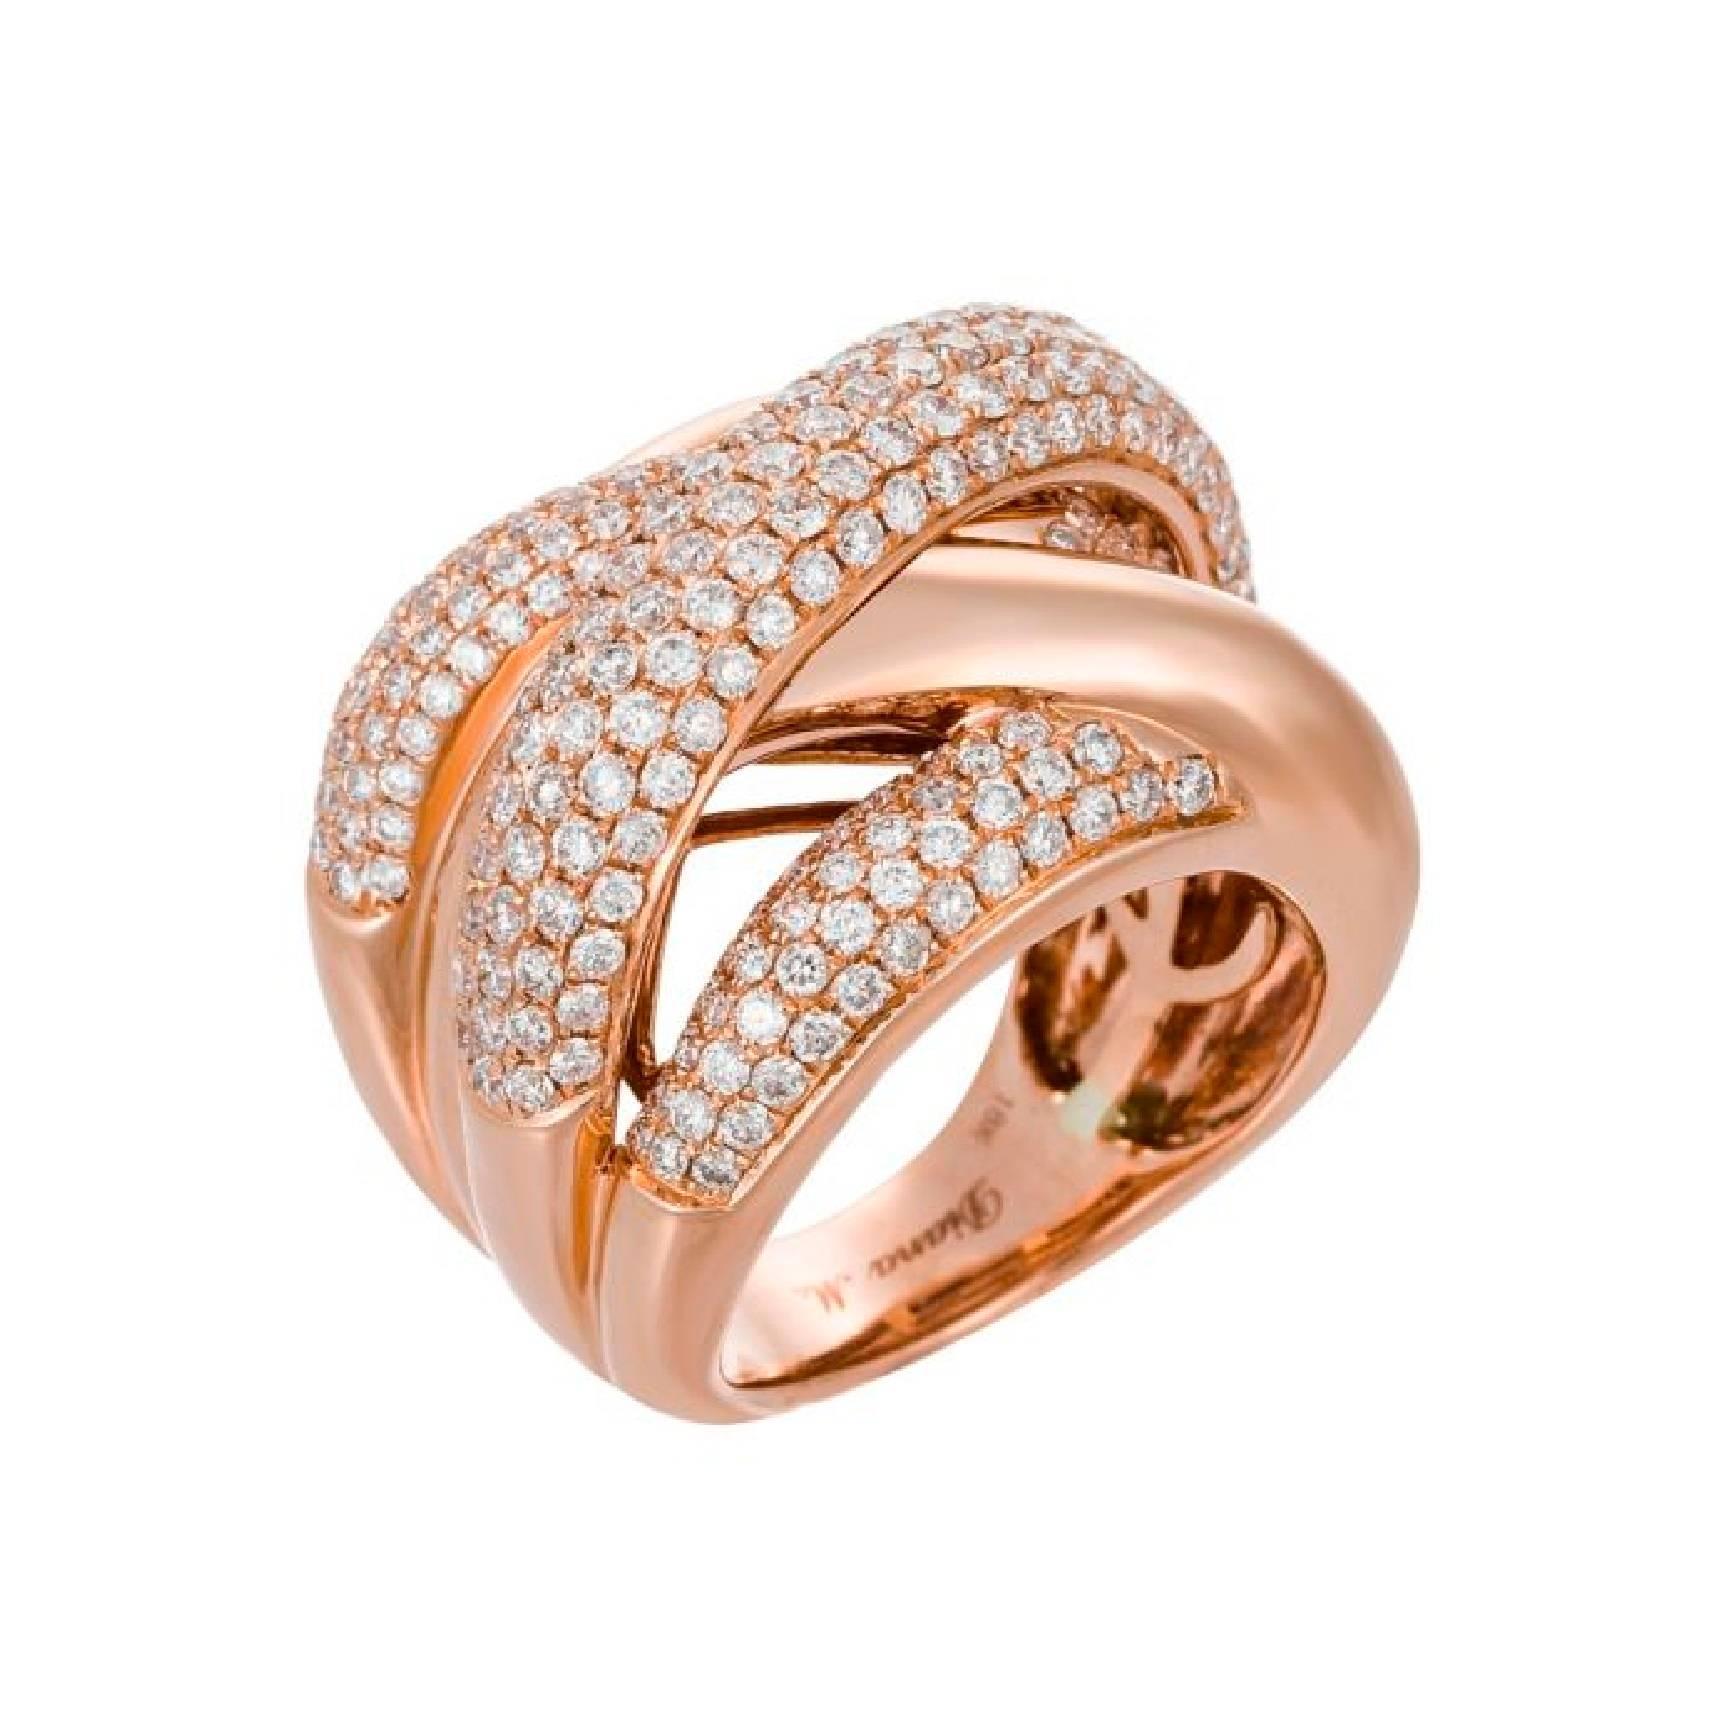 18K Rose gold multi-band ring
Crossover multi-band ring with round diamonds throughout
Can be resized to any finger size 

Diamond specifications:
3.00 Carats of diamonds
F/G color, SI clarity 

This product comes with a certificate of